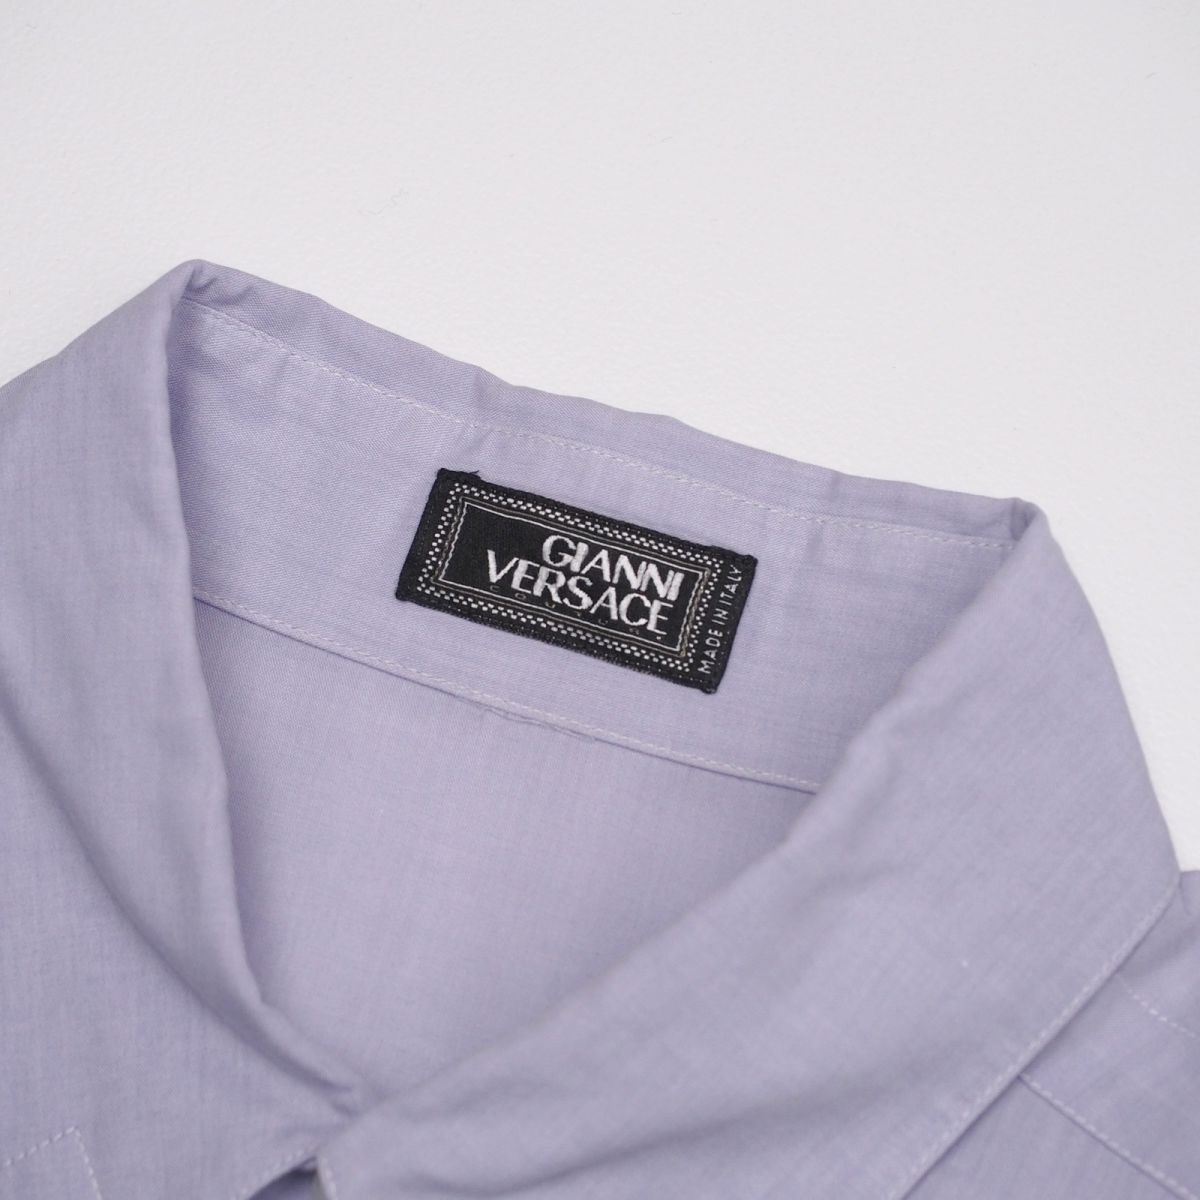 W1544* Italy made * Gianni Versace /GIANNI VERSACE* shell button * ratio wing ..* long sleeve * button down shirt / solid shirt * purple series * men's *54